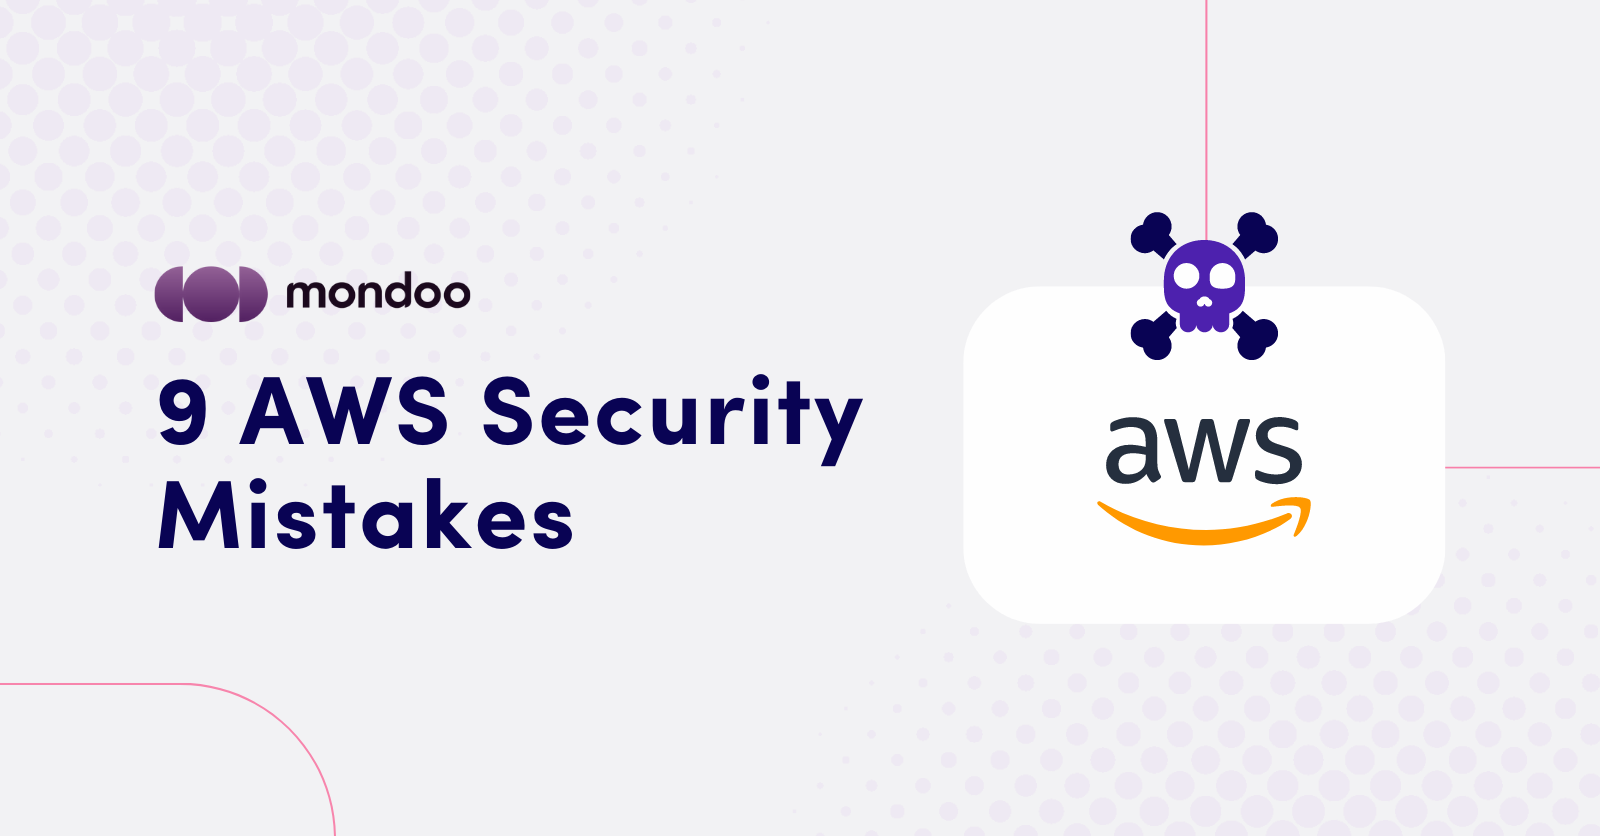 9 AWS Security Mistakes for DevOps Teams (1)